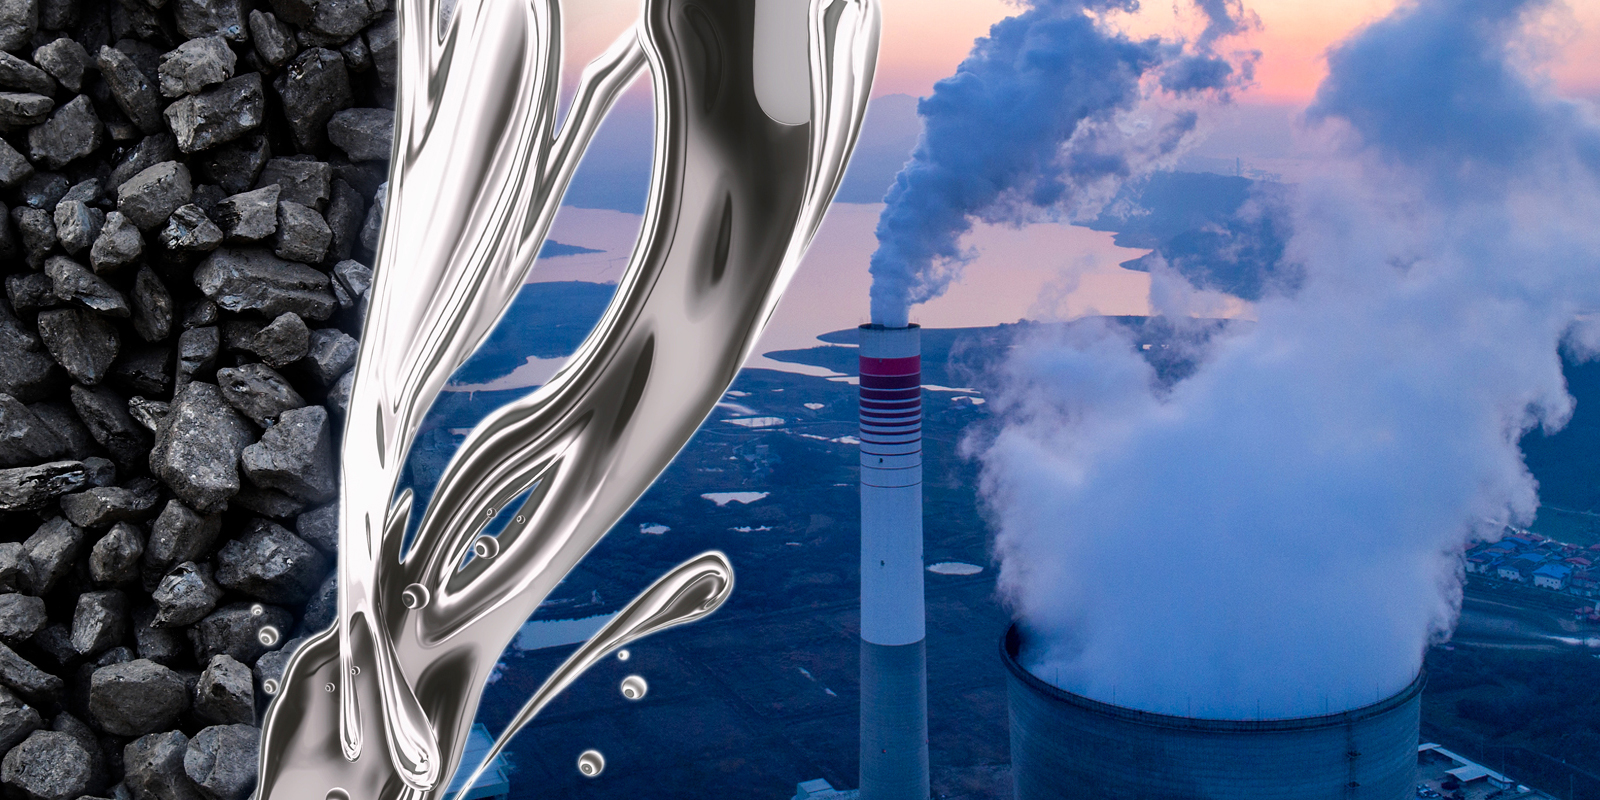 EPA_Proposes_Stricter_Mercury_And_Air_Toxics_Stan